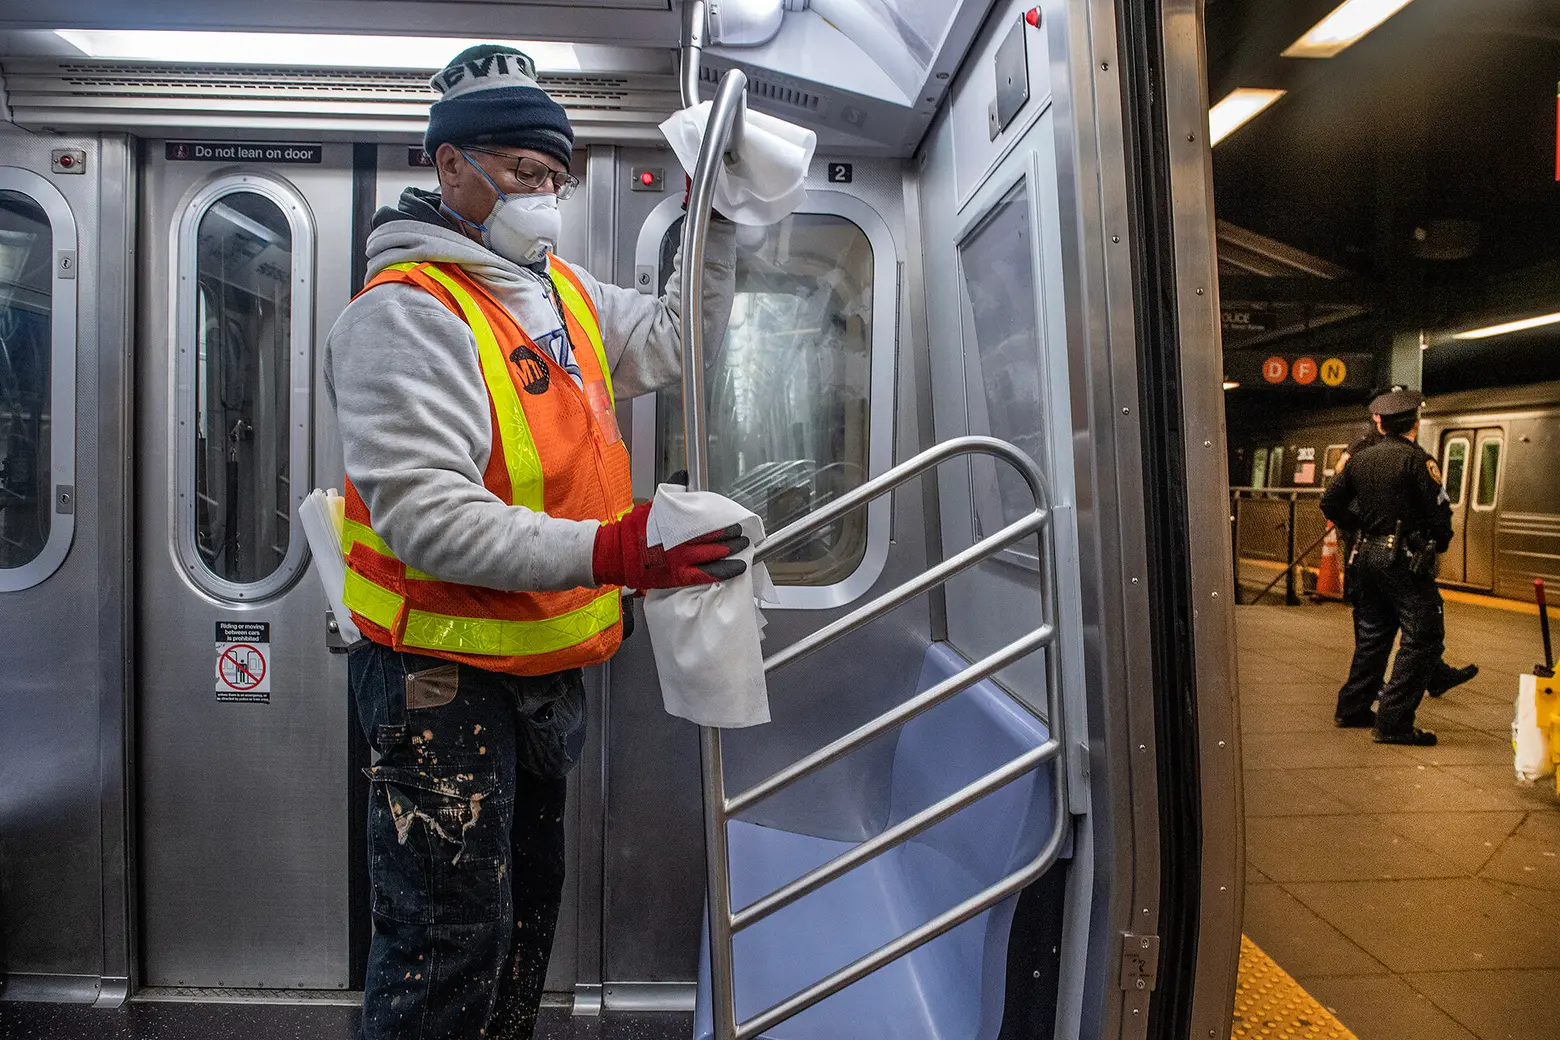 FEMA pulls funding for sanitizing schools and subways, according to officials